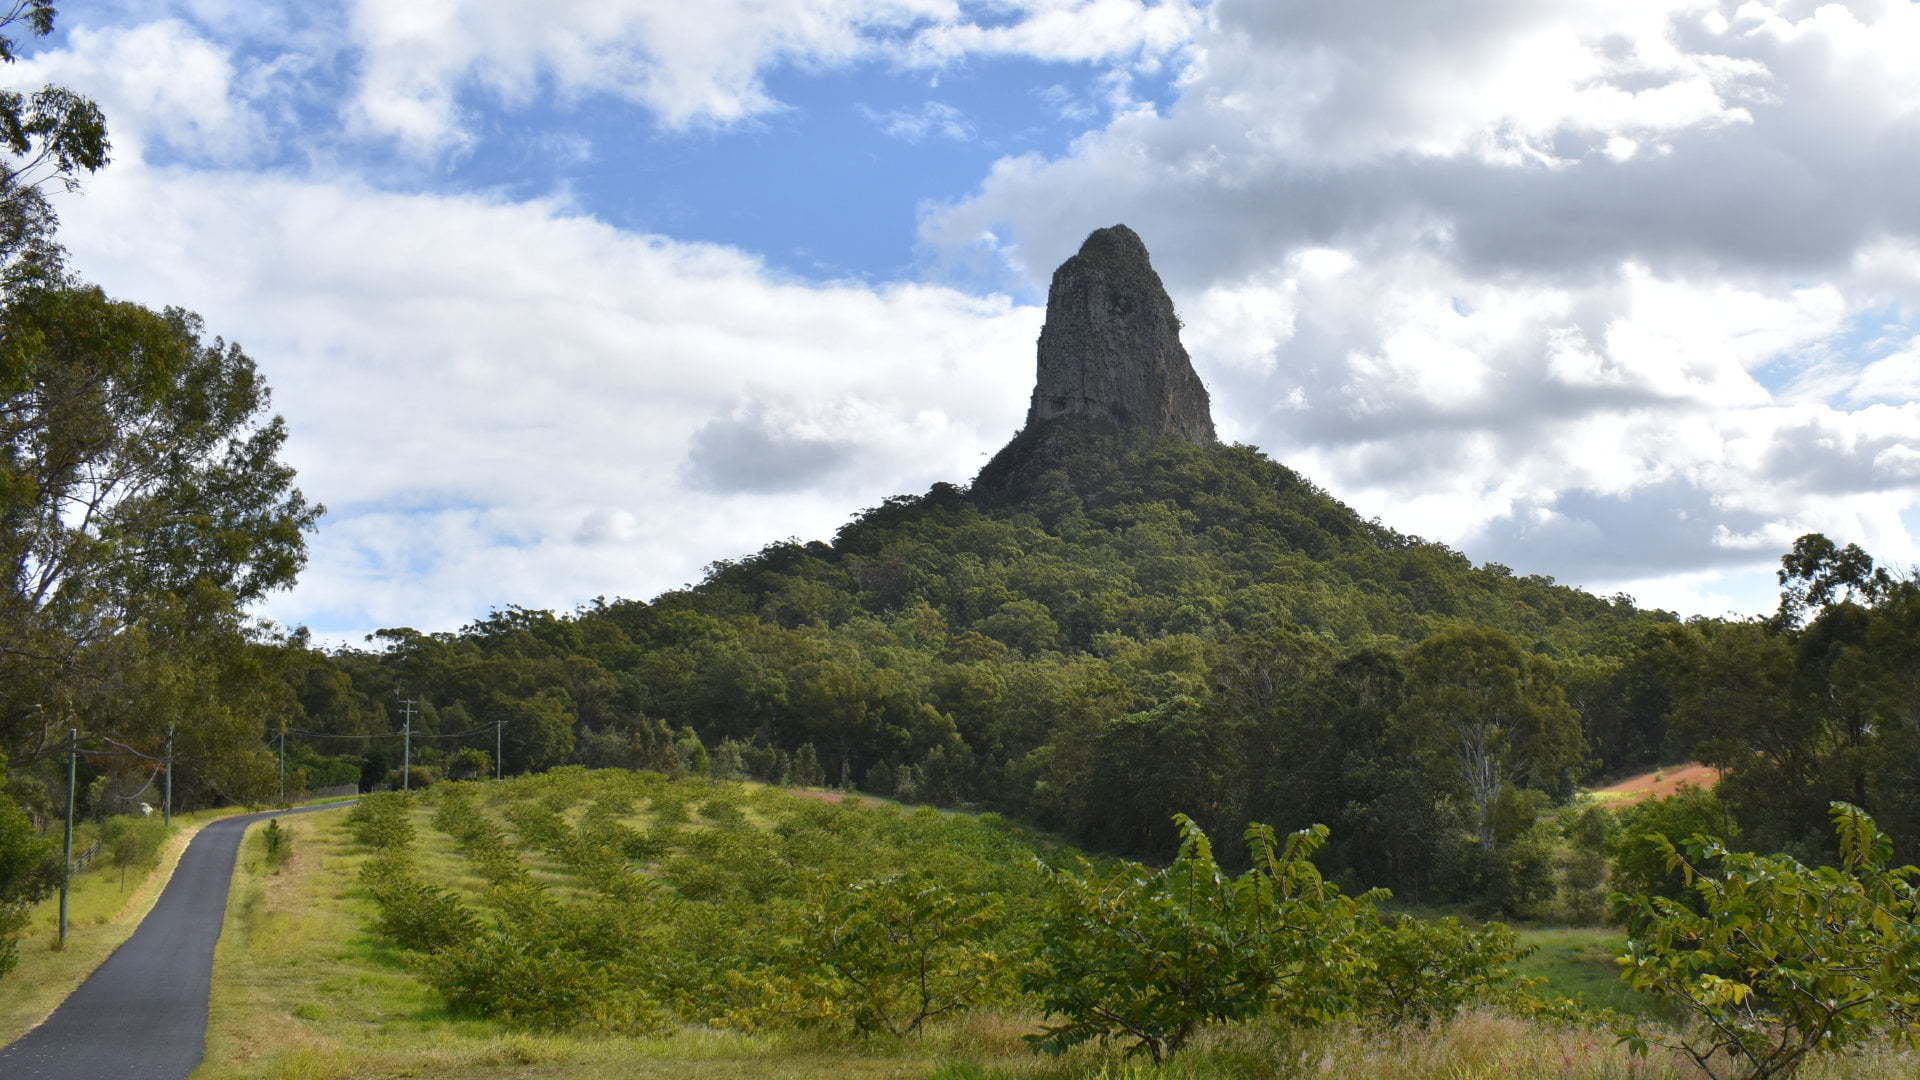 View of Mt Coonowrin, one of the peaks forming the Glass House Mountains. The area is closed from public access, the viewing point provides space to view Mt Coonowrin